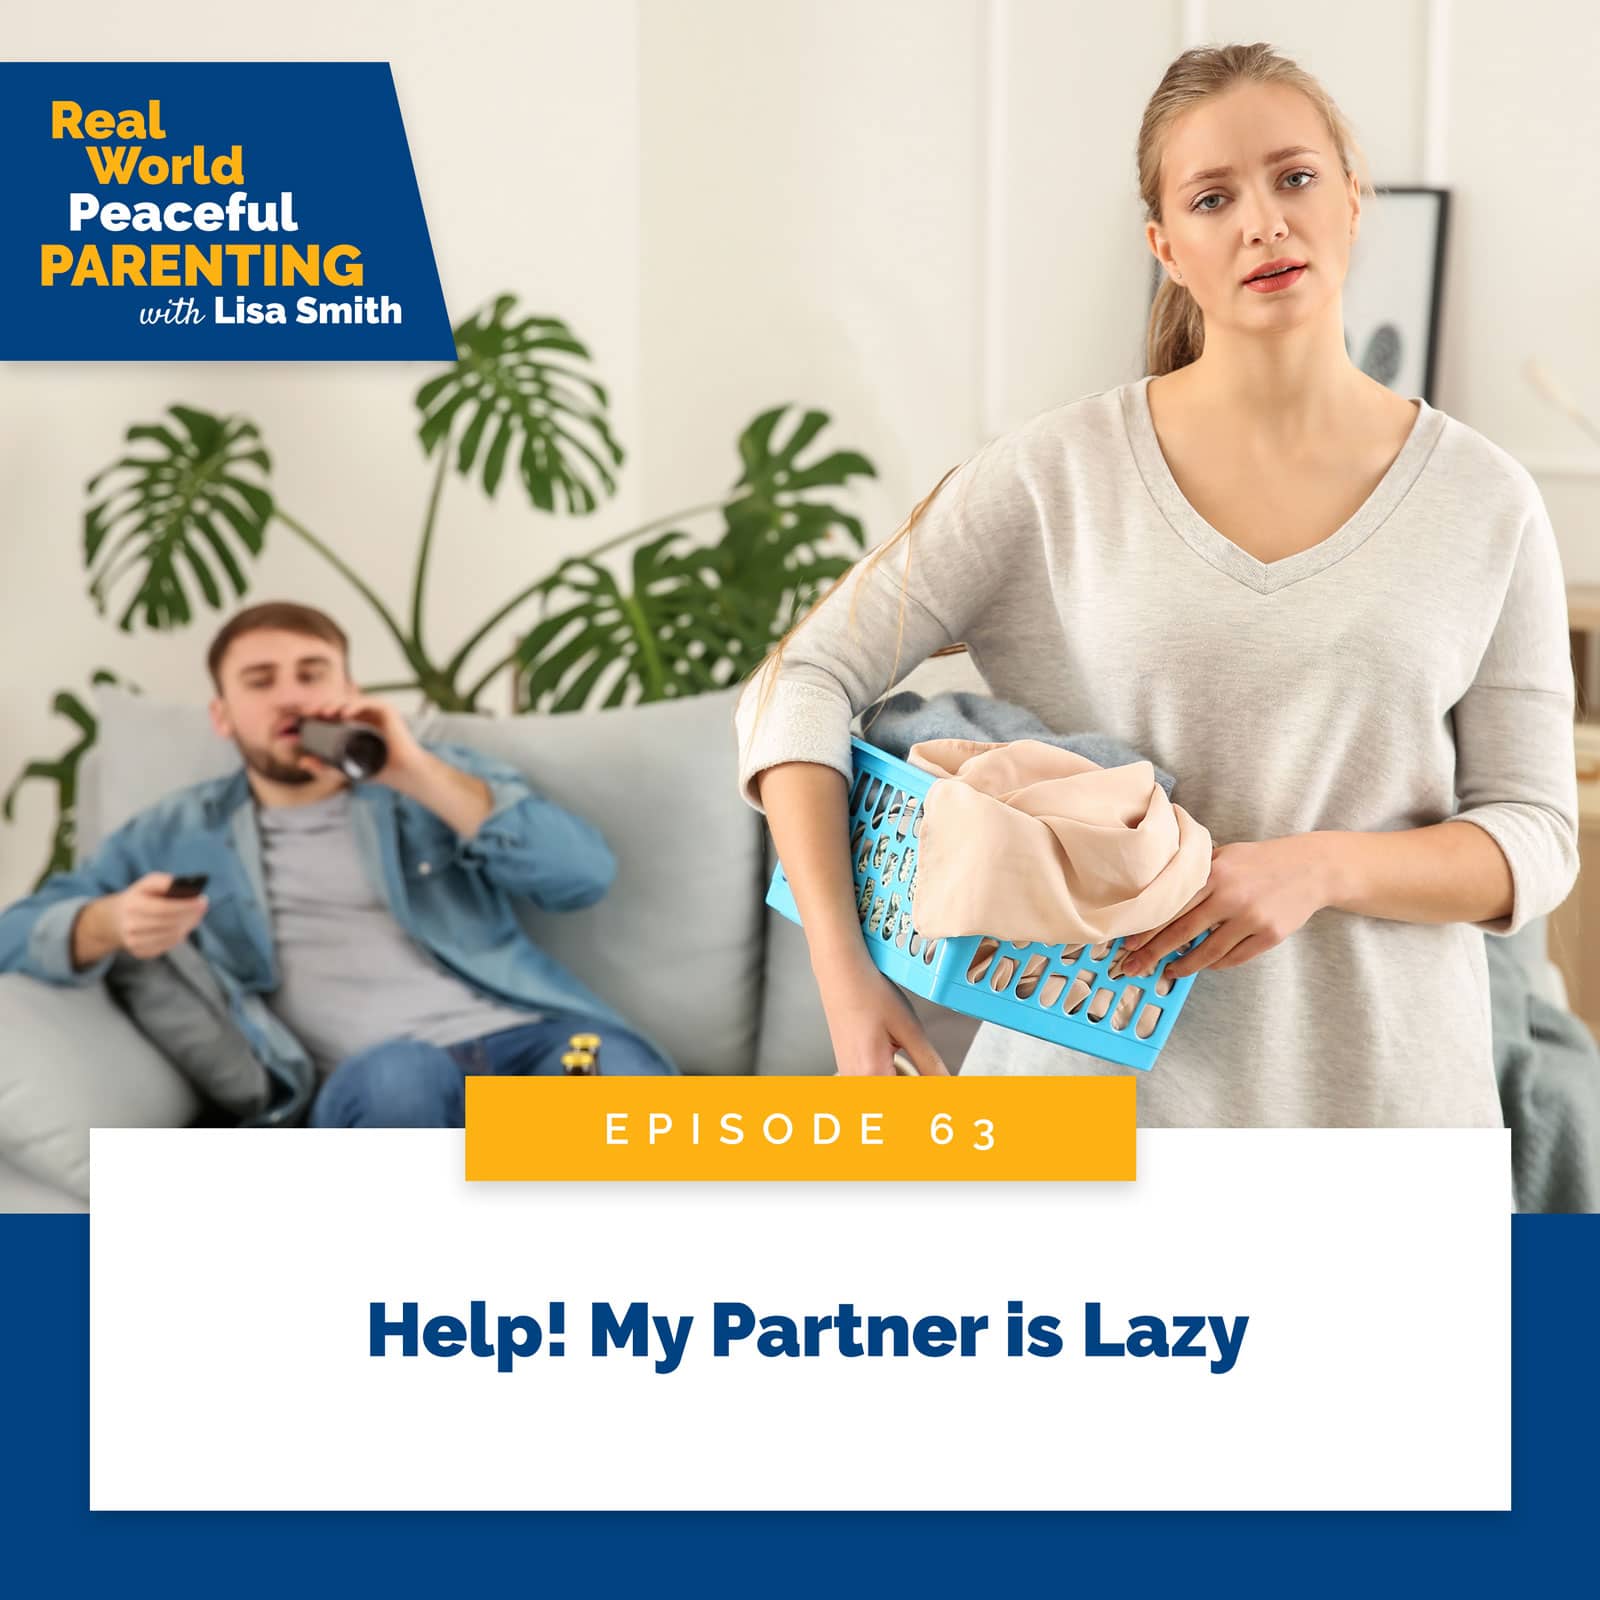 Real World Peaceful Parenting with Lisa Smith | Help! My Partner is Lazy